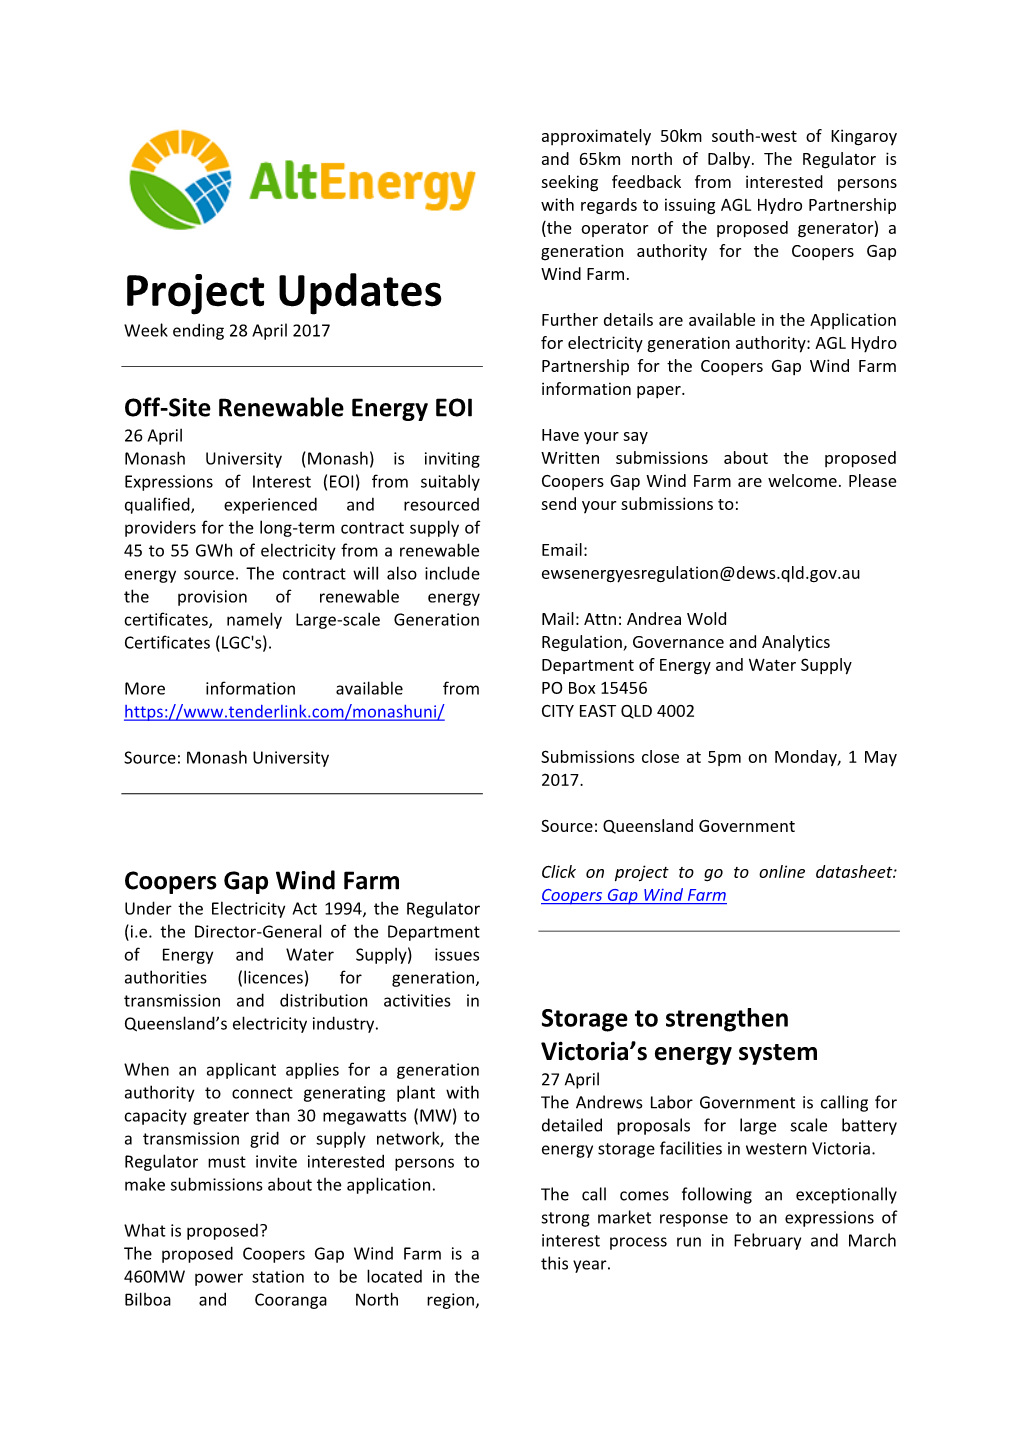 Project Updates Further Details Are Available in the Application Week Ending 28 April 2017 for Electricity Generation Authority: AGL Hydro